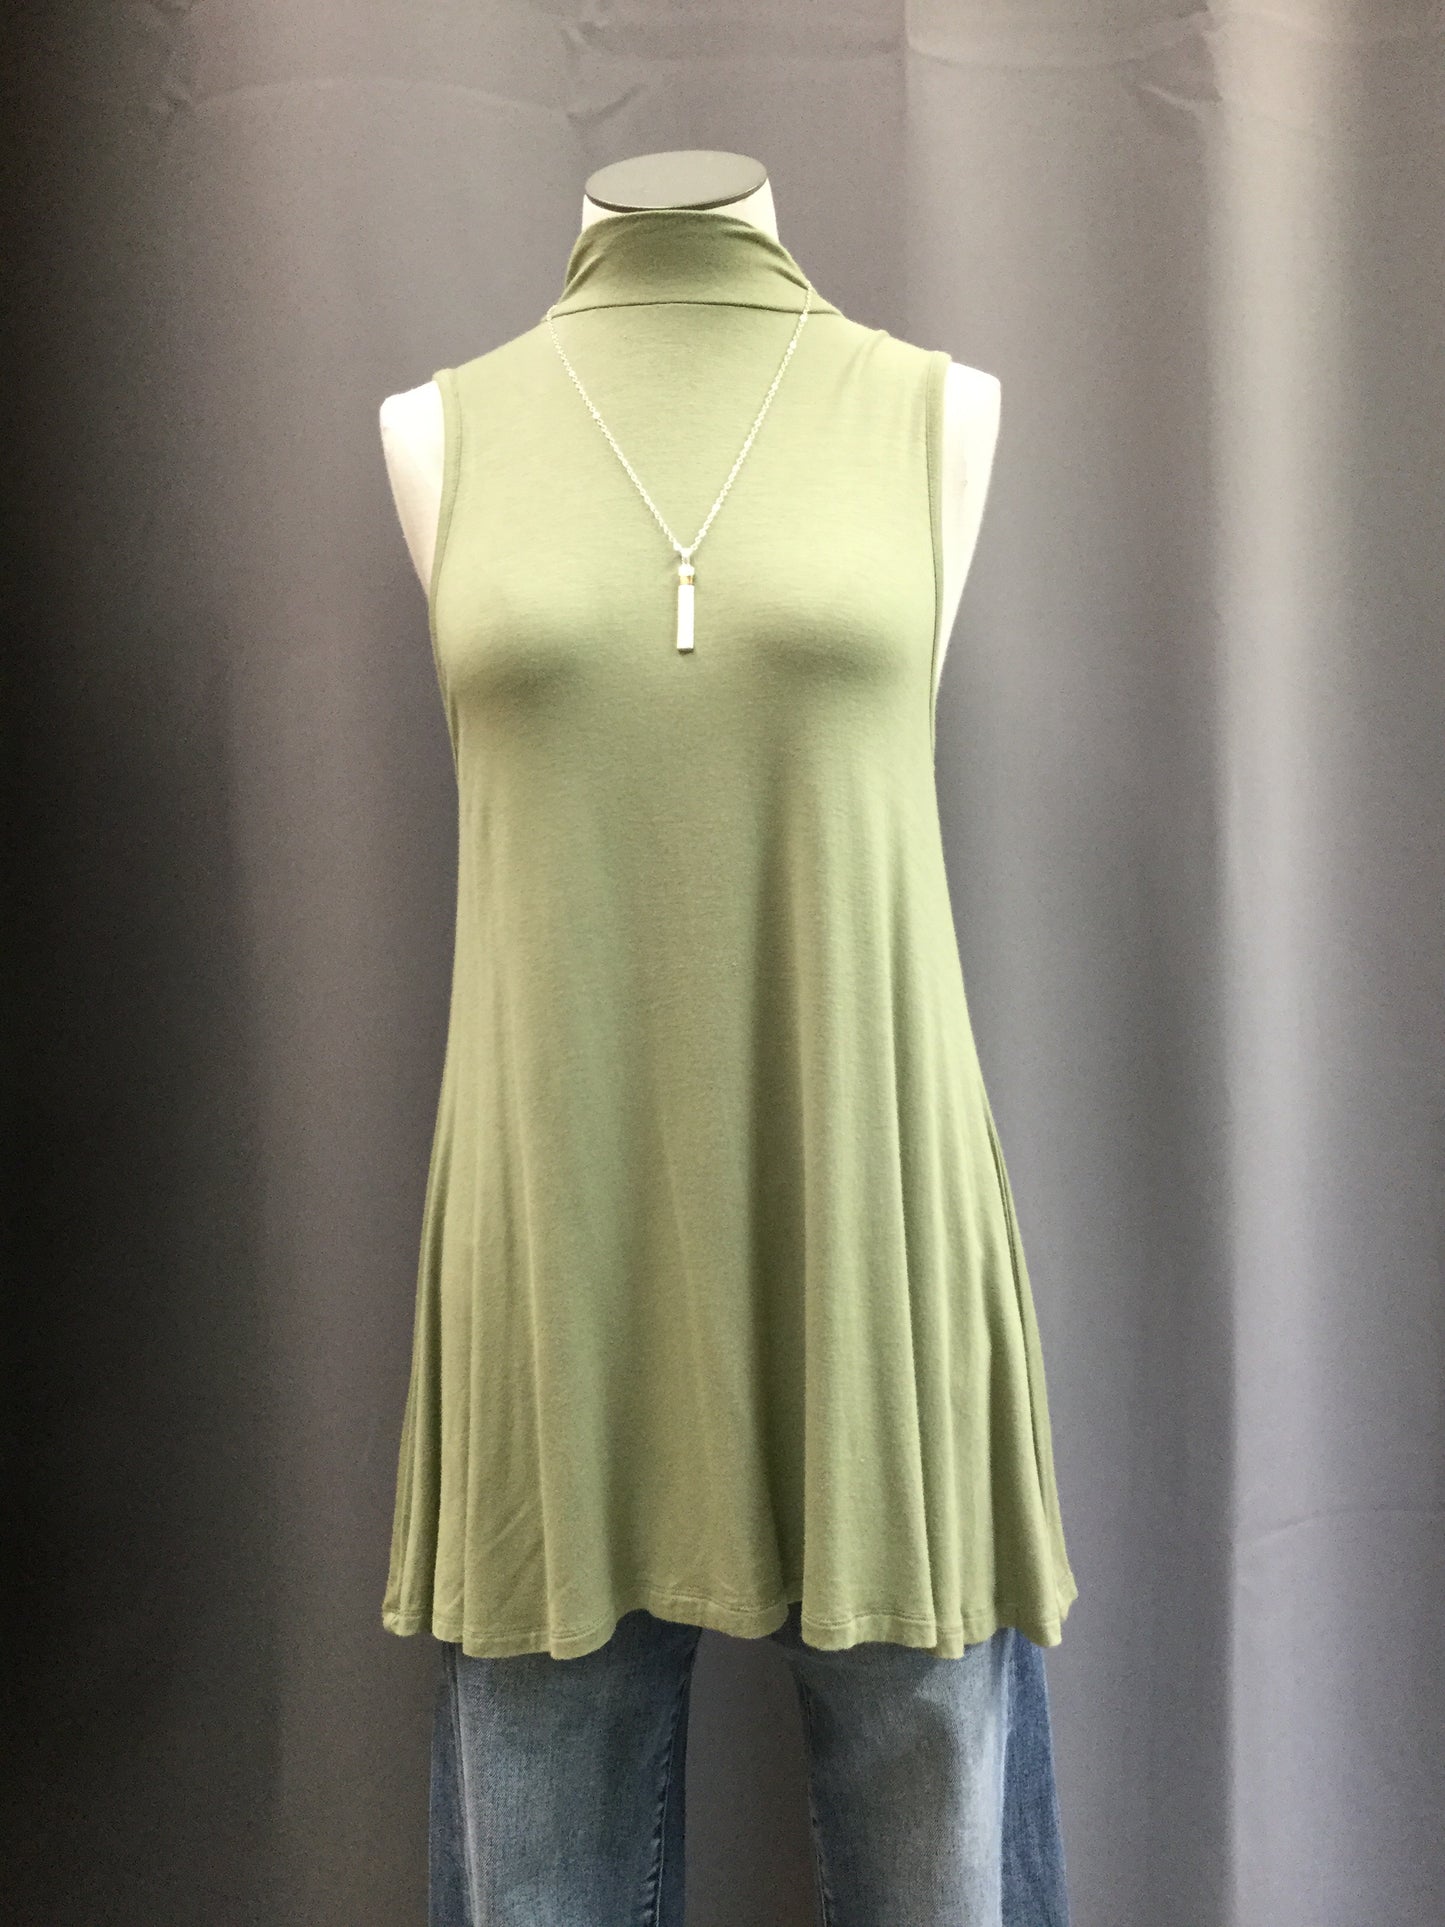 Olive Knit Solid Sleeveless Mock Neck Top